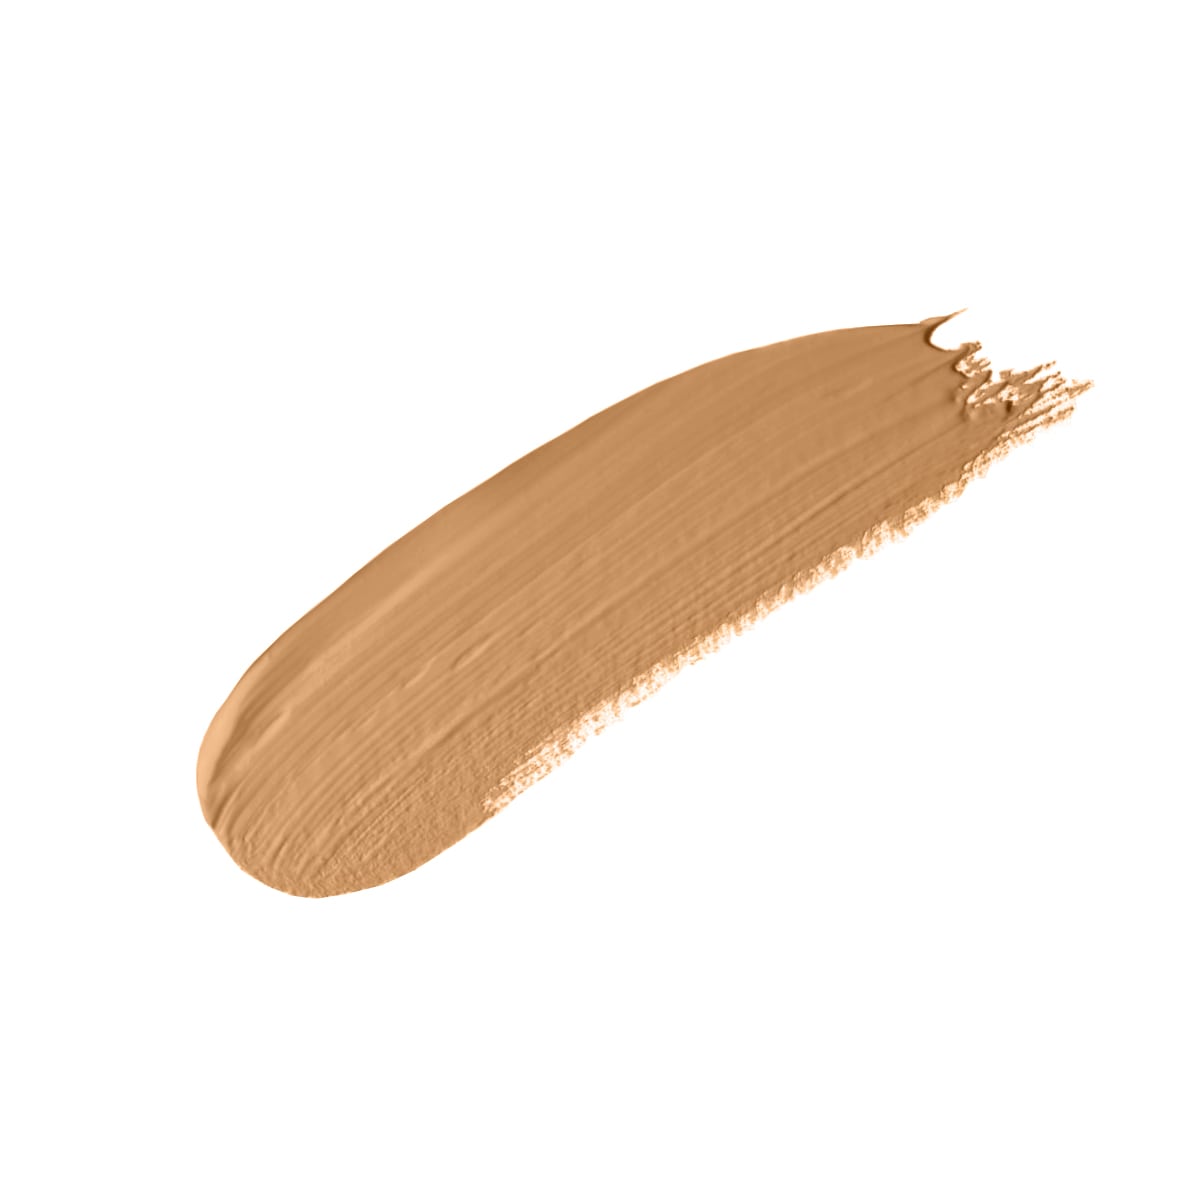 6 - WARM BROWN - buildable, creamy, hydrating concealer in warm brown undertone shade six